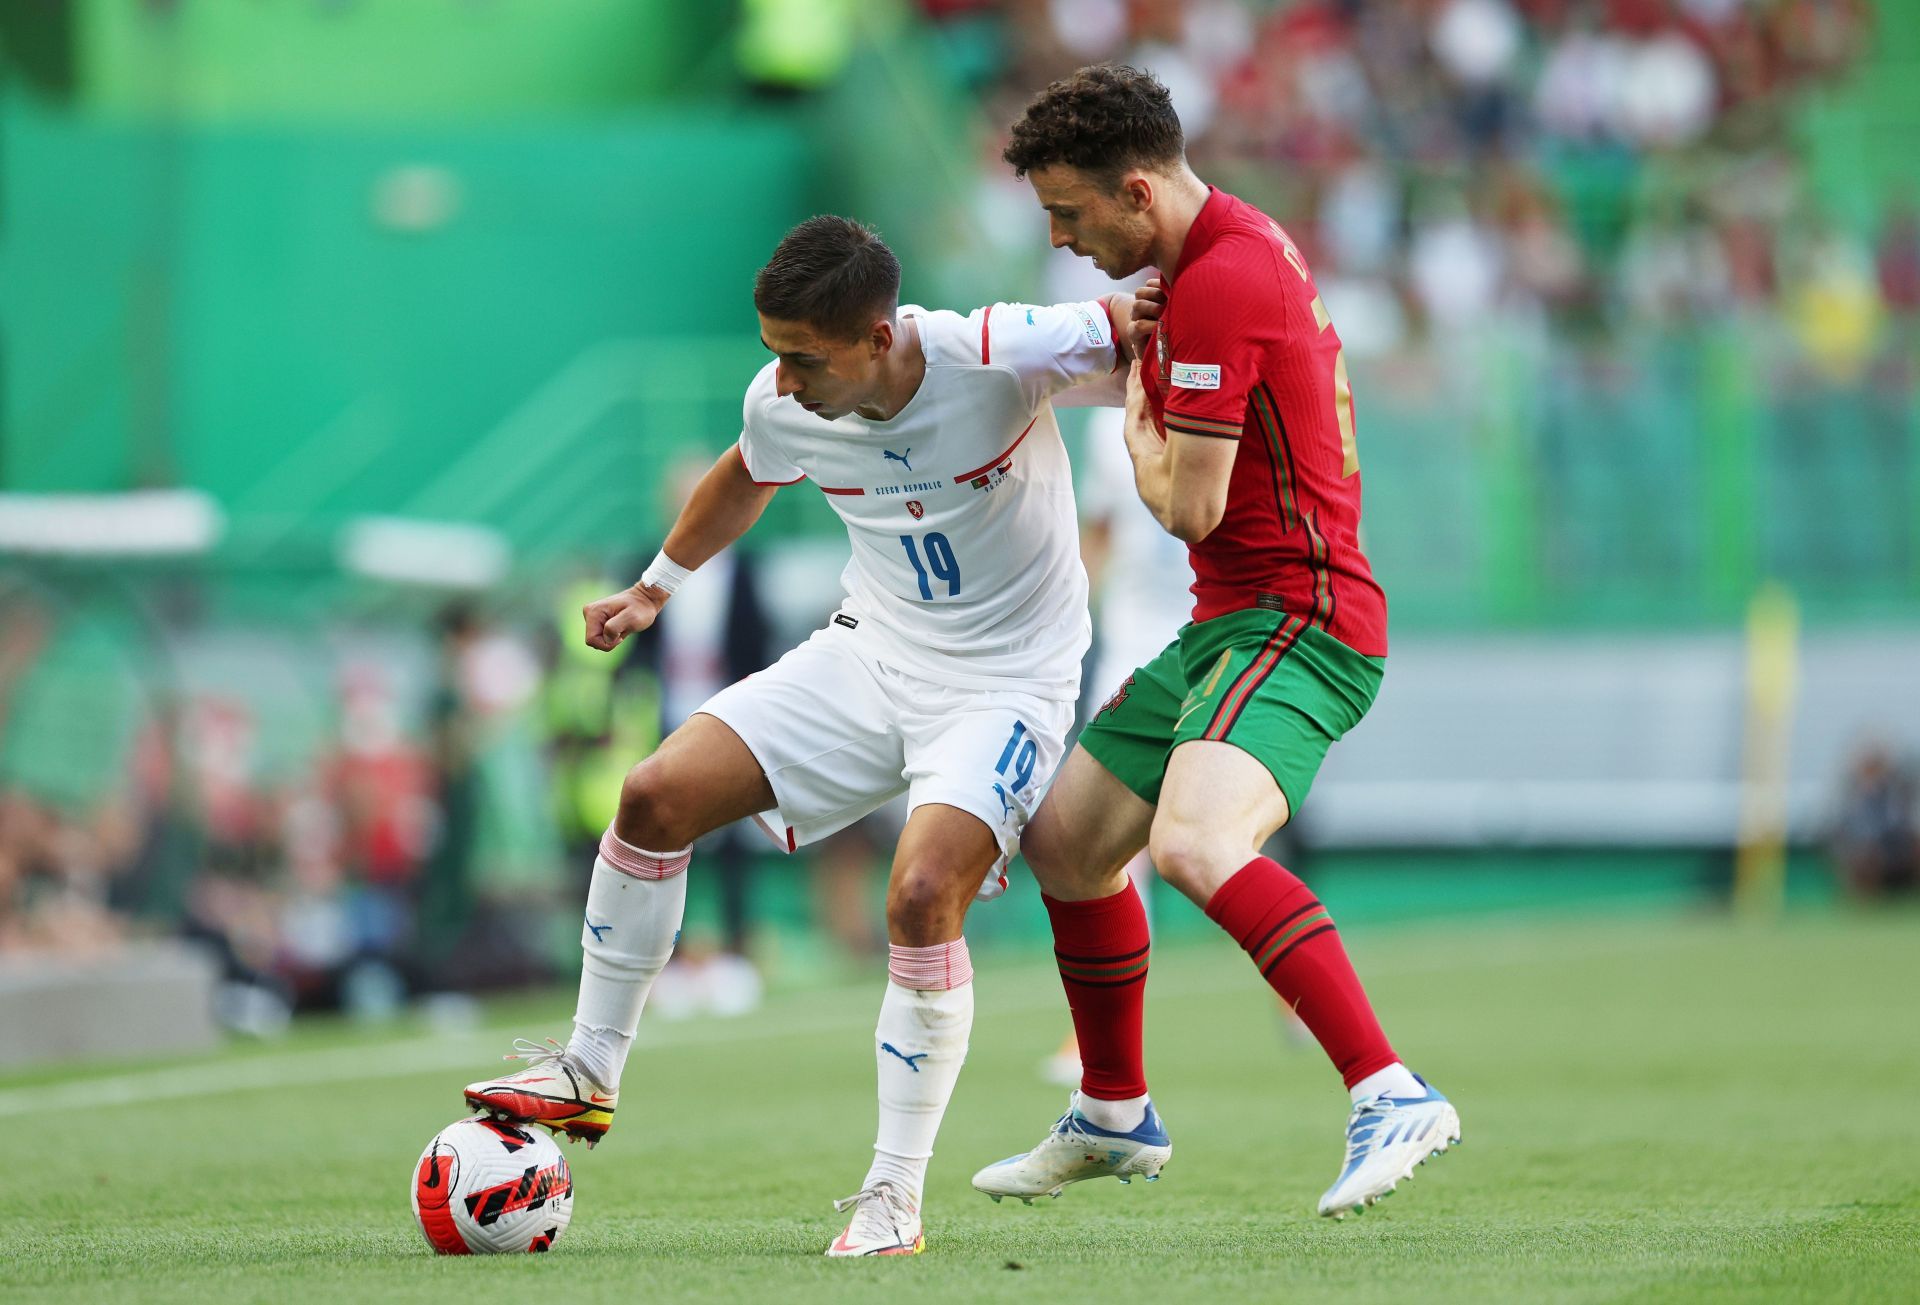 Diogo Jota (right) endured a largely quiet night for Portugal during their match against the Czech Republic.